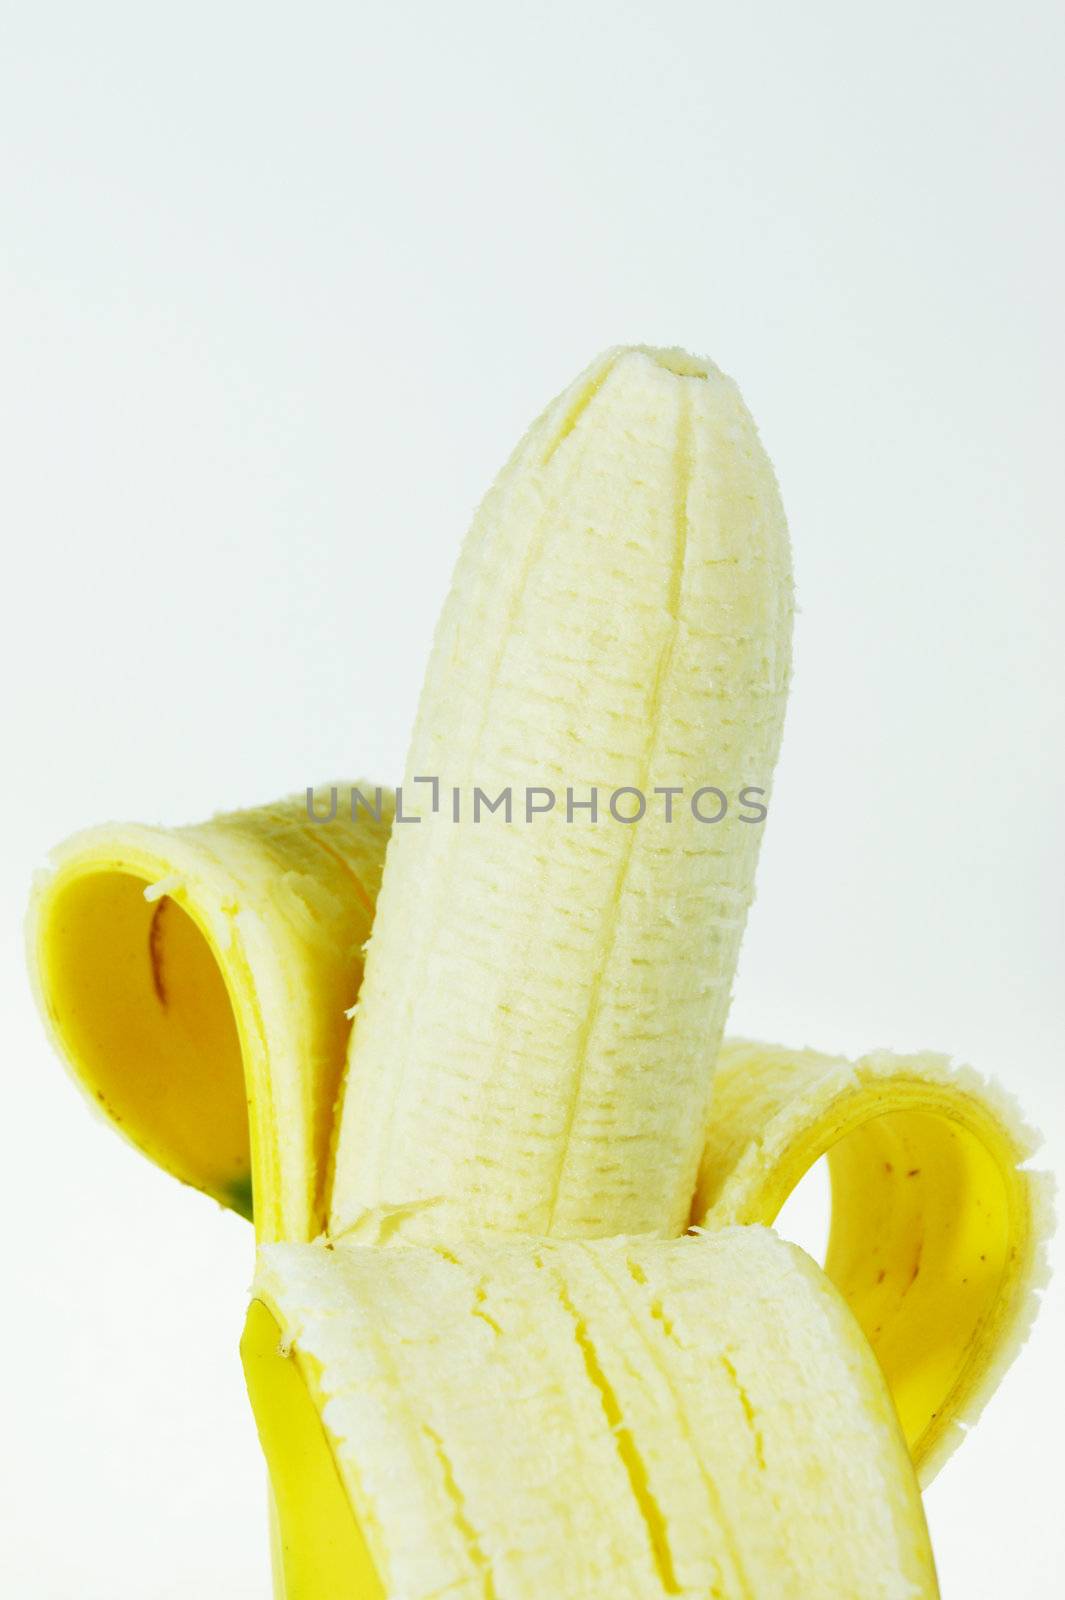 Banana peel isolated on white background by Noppharat_th